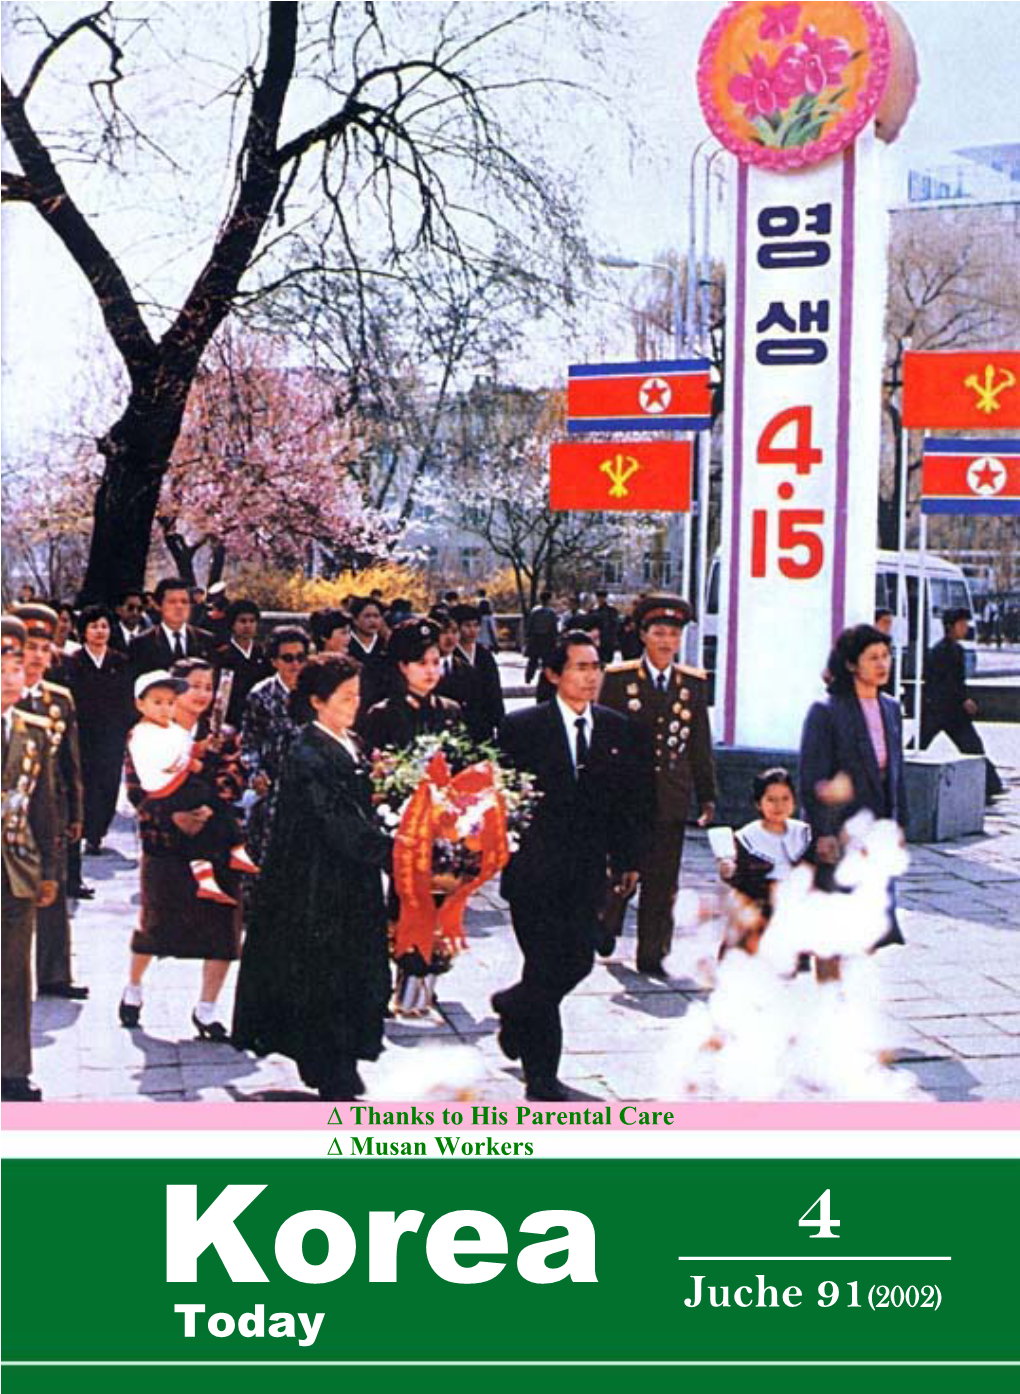 Juche 91(2002) Today Poster: Mass Gymnastic and Artistic Performance “Arirang”